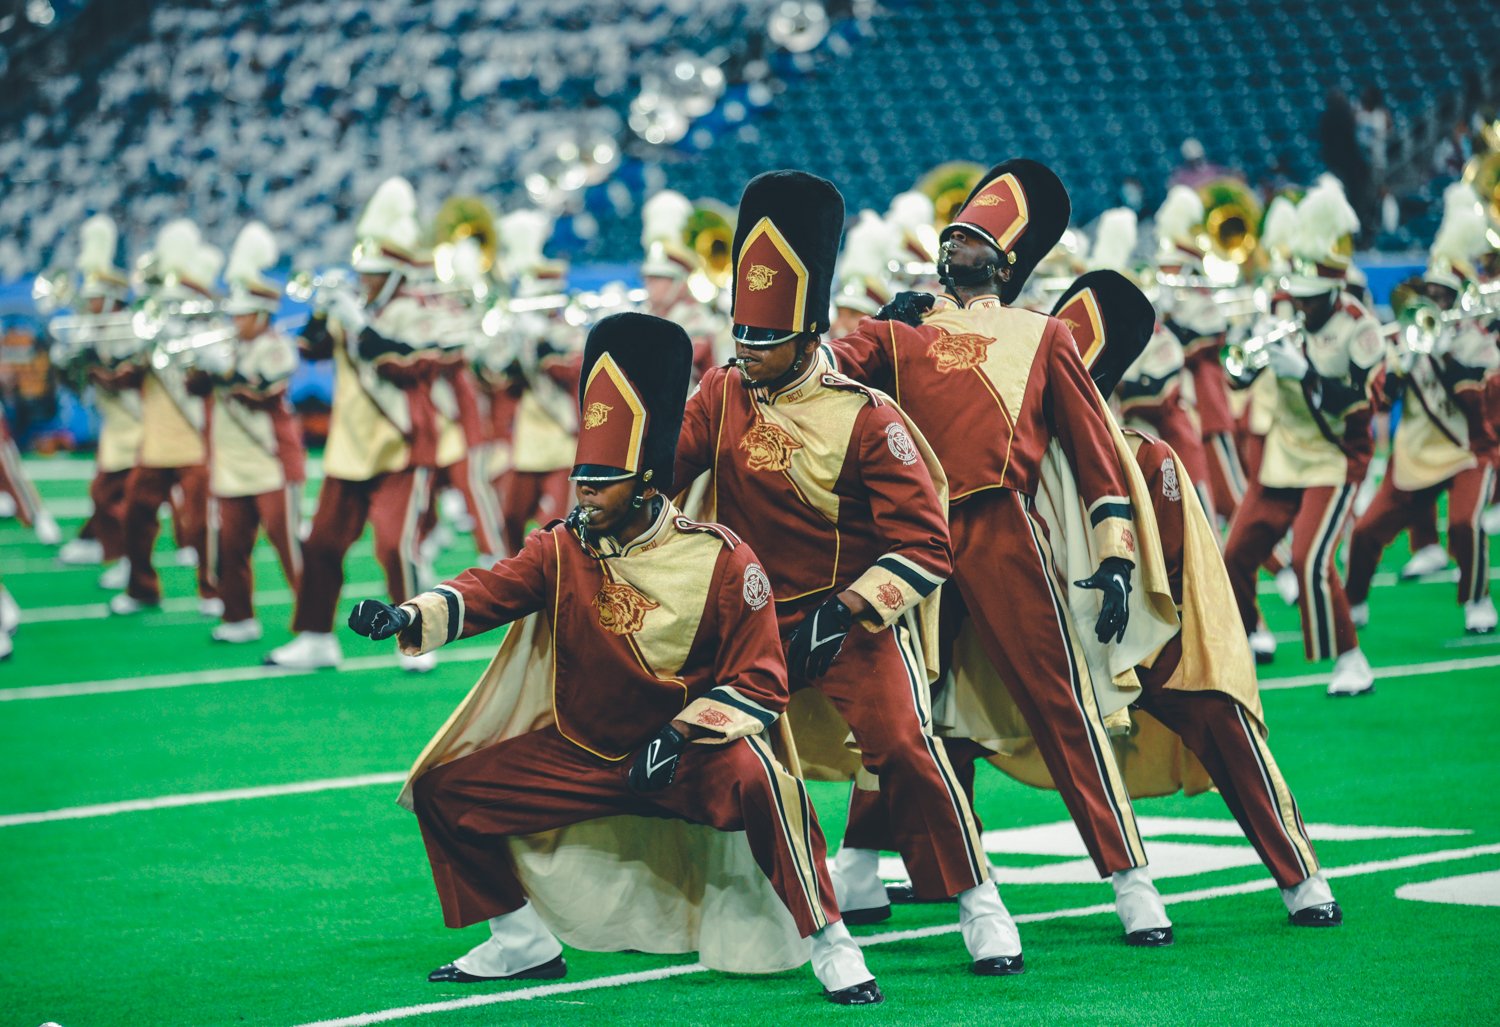 The Battle of the Bands has a rich history within the Black community. 